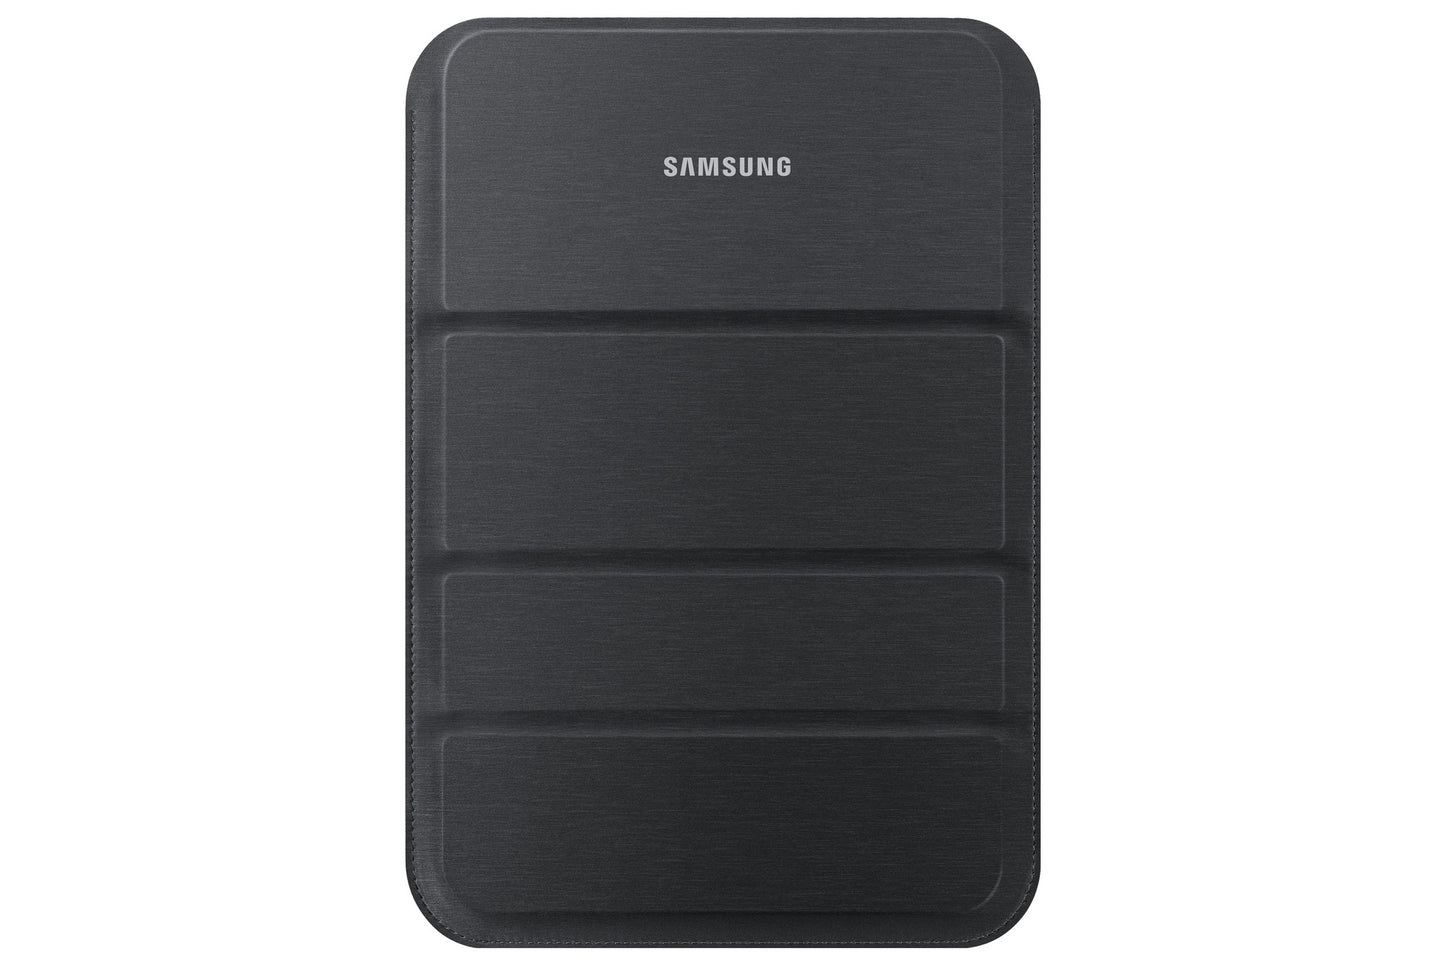 Samsung EF-SN510B Carrying Case (Pouch) for 8" Tablet - Black